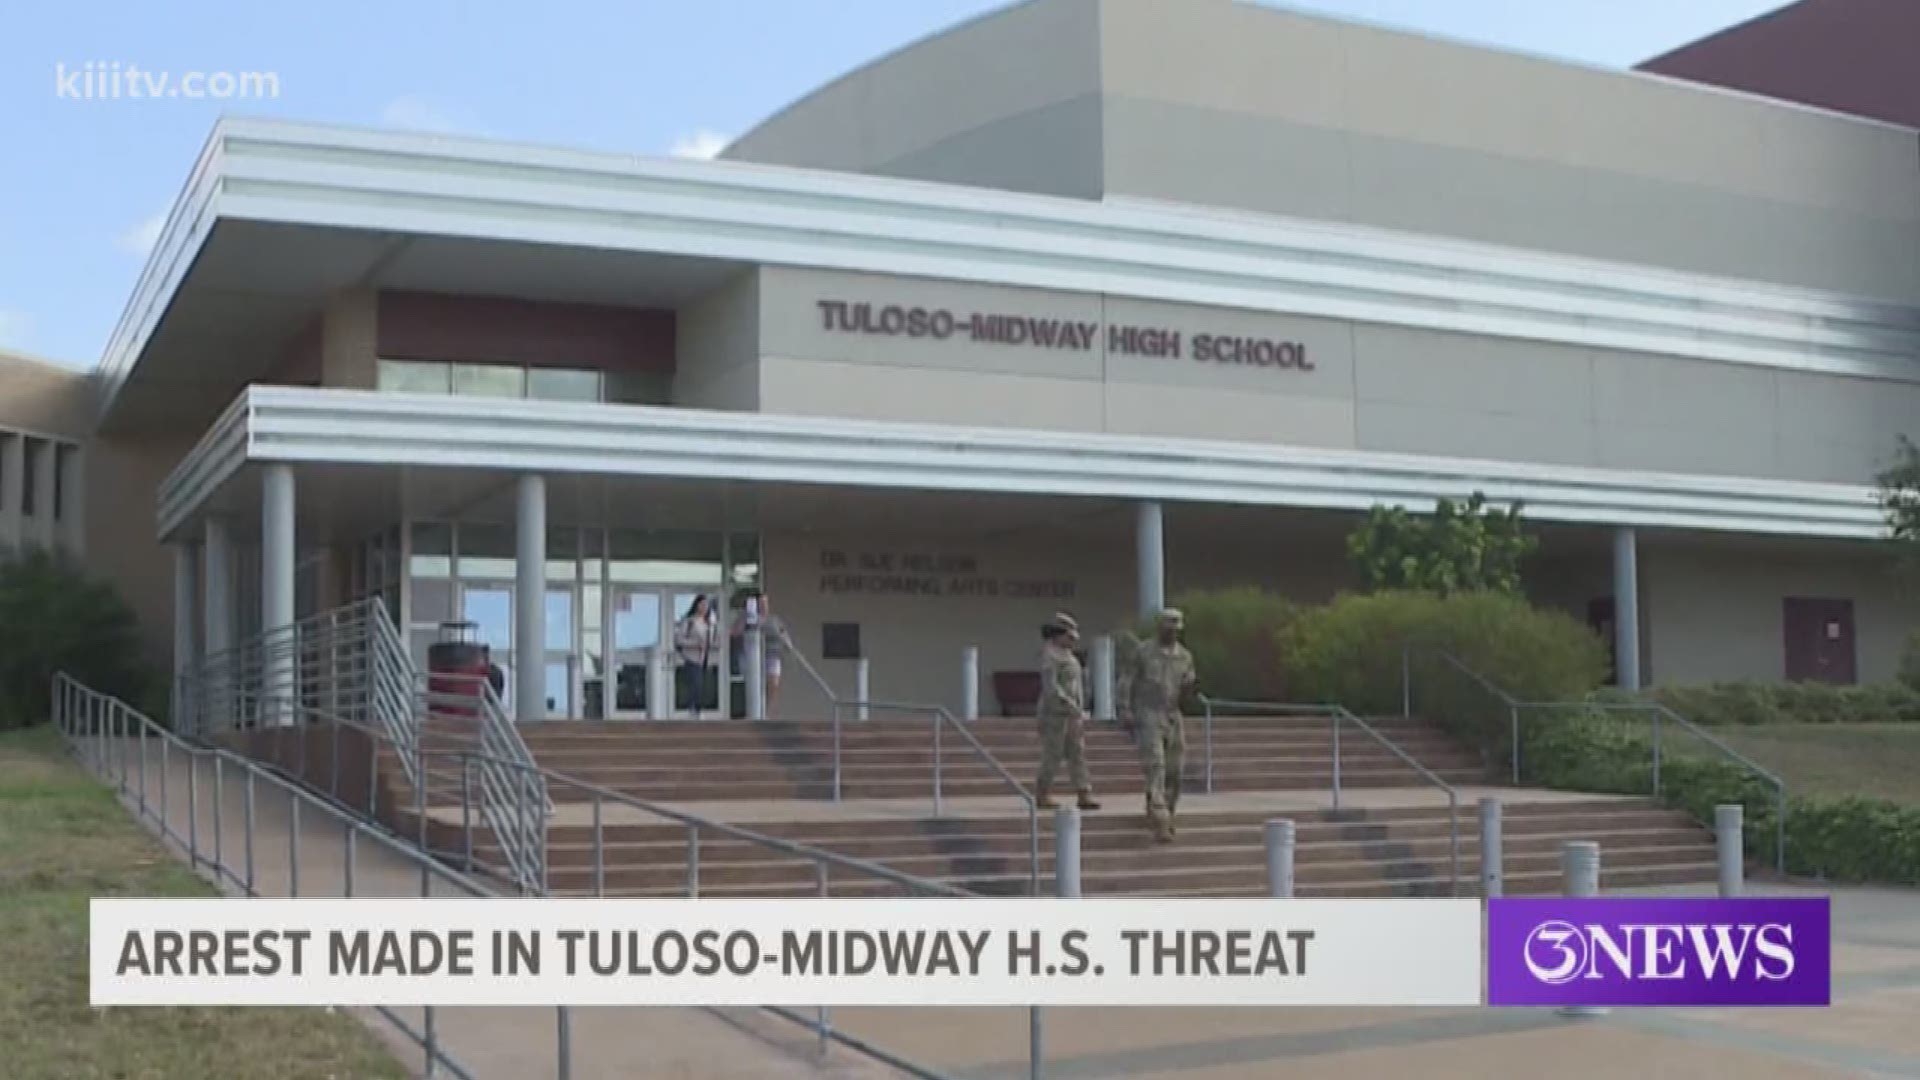 An arrest has been made in connection with a social media threat that prompted an increased police presence Wednesday at Tuloso-Midway High School.